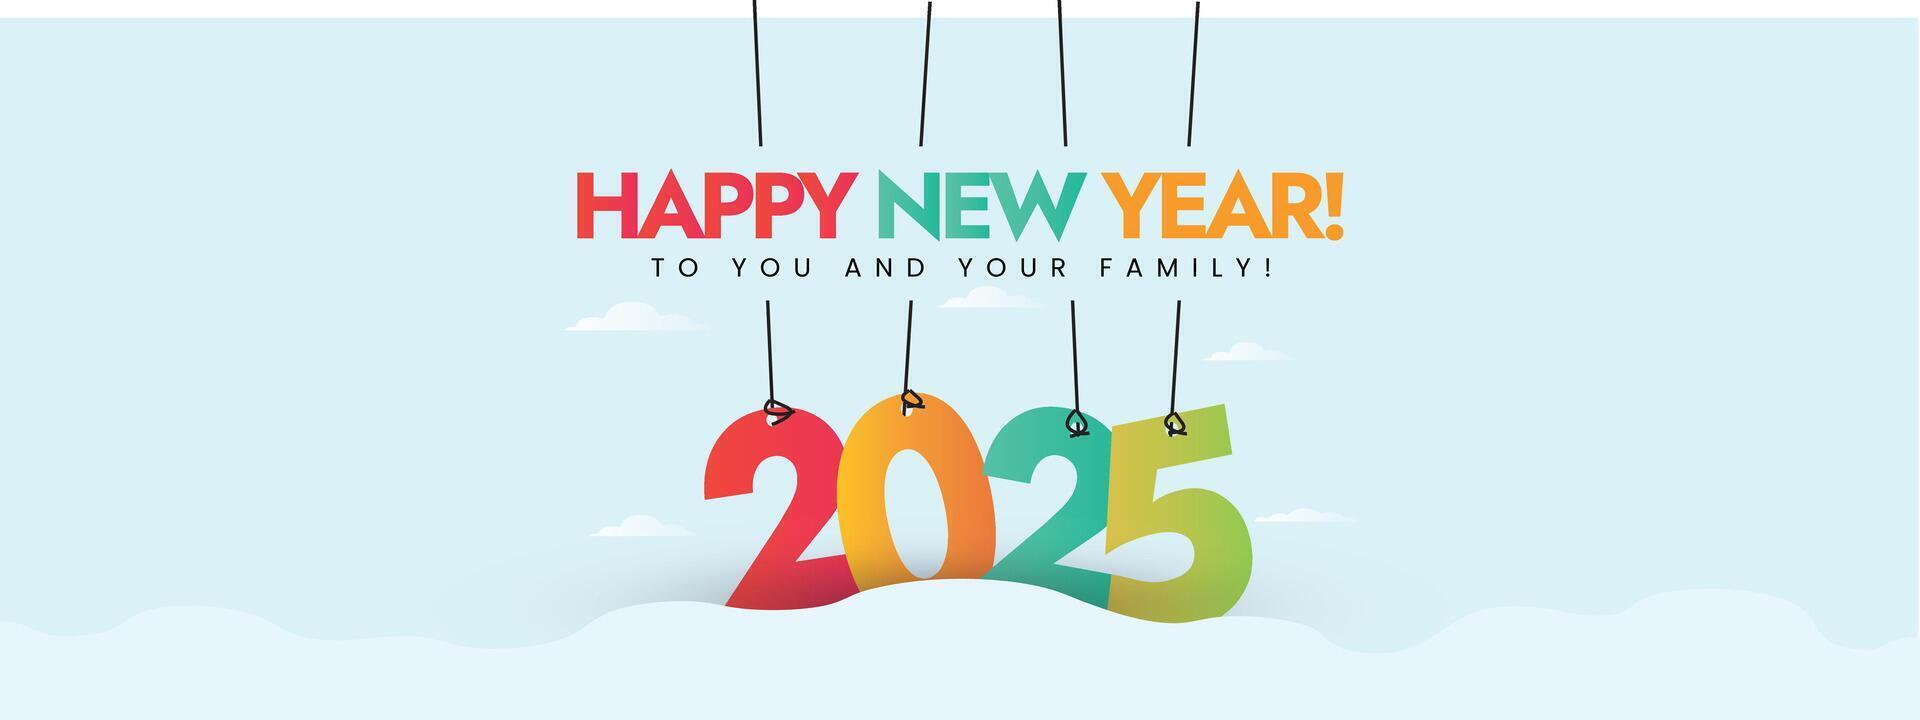 2025. Happy New Year 2025 banner. 2025 celebration banner with colourful hanging numbers 2, 0, 2 and 5. New year 2025 celebration banner and social media poster with light cyan background. vector